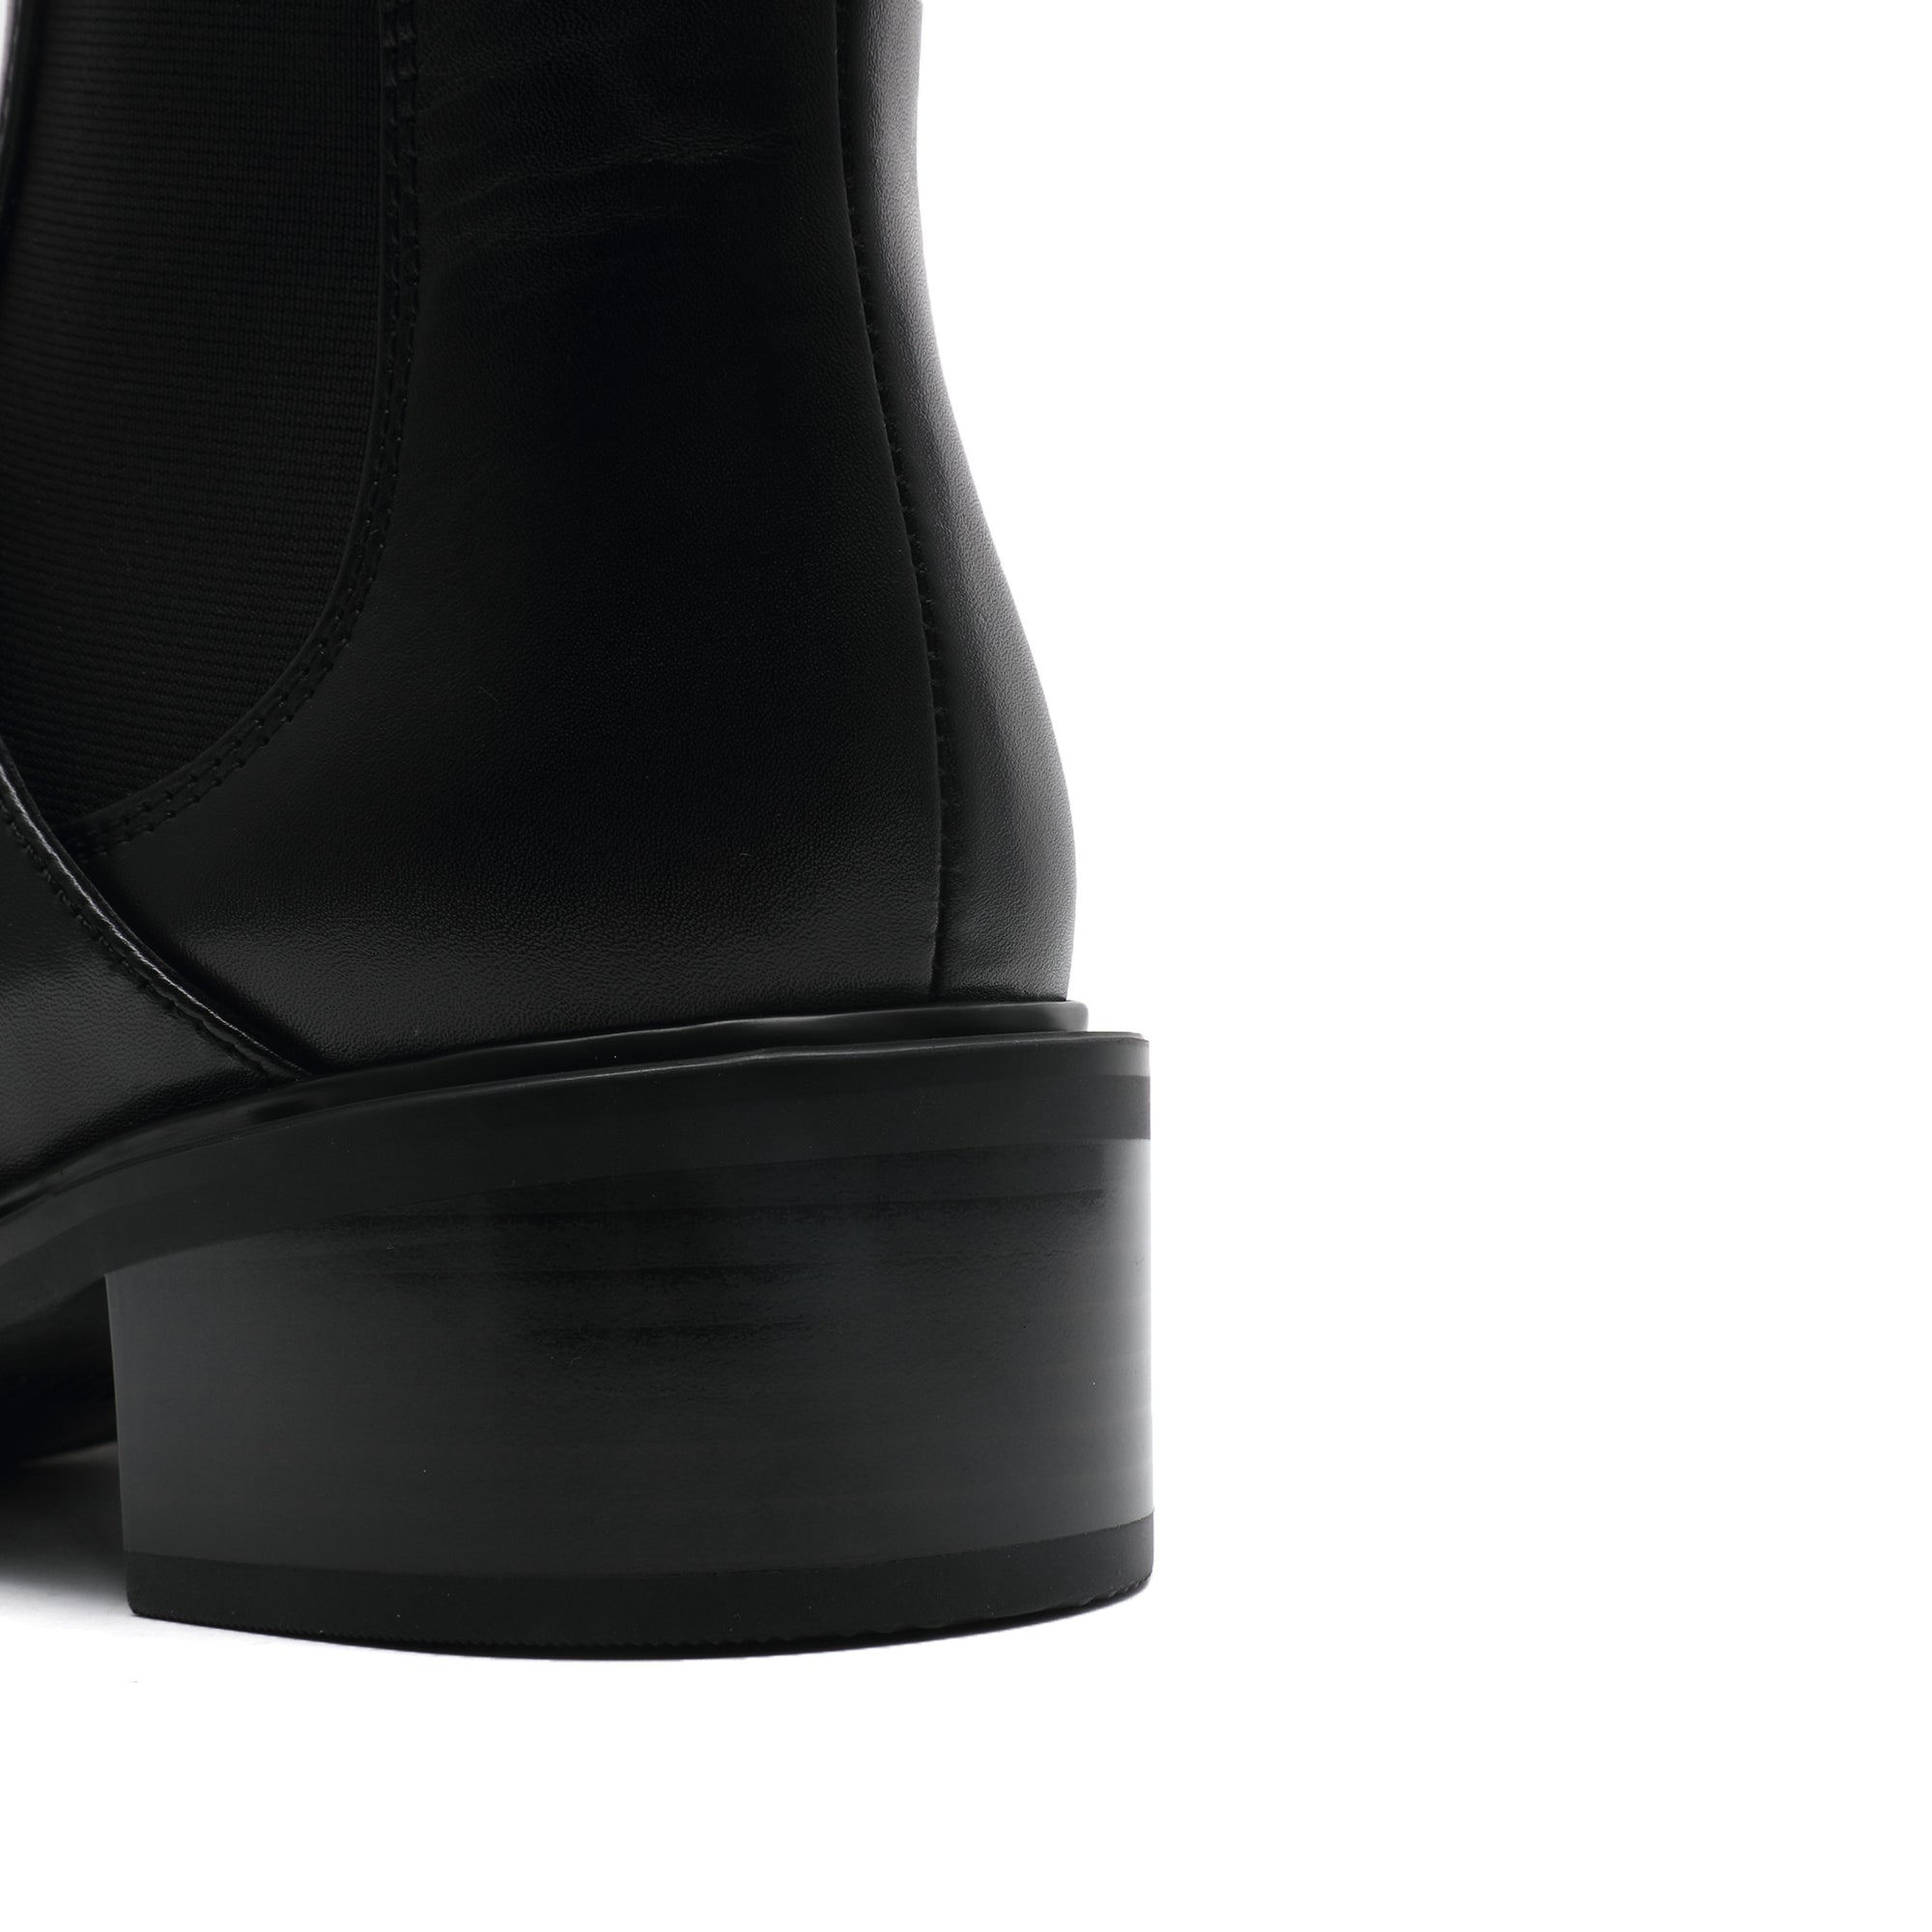 Black Chelsea Boots With ST Buckle